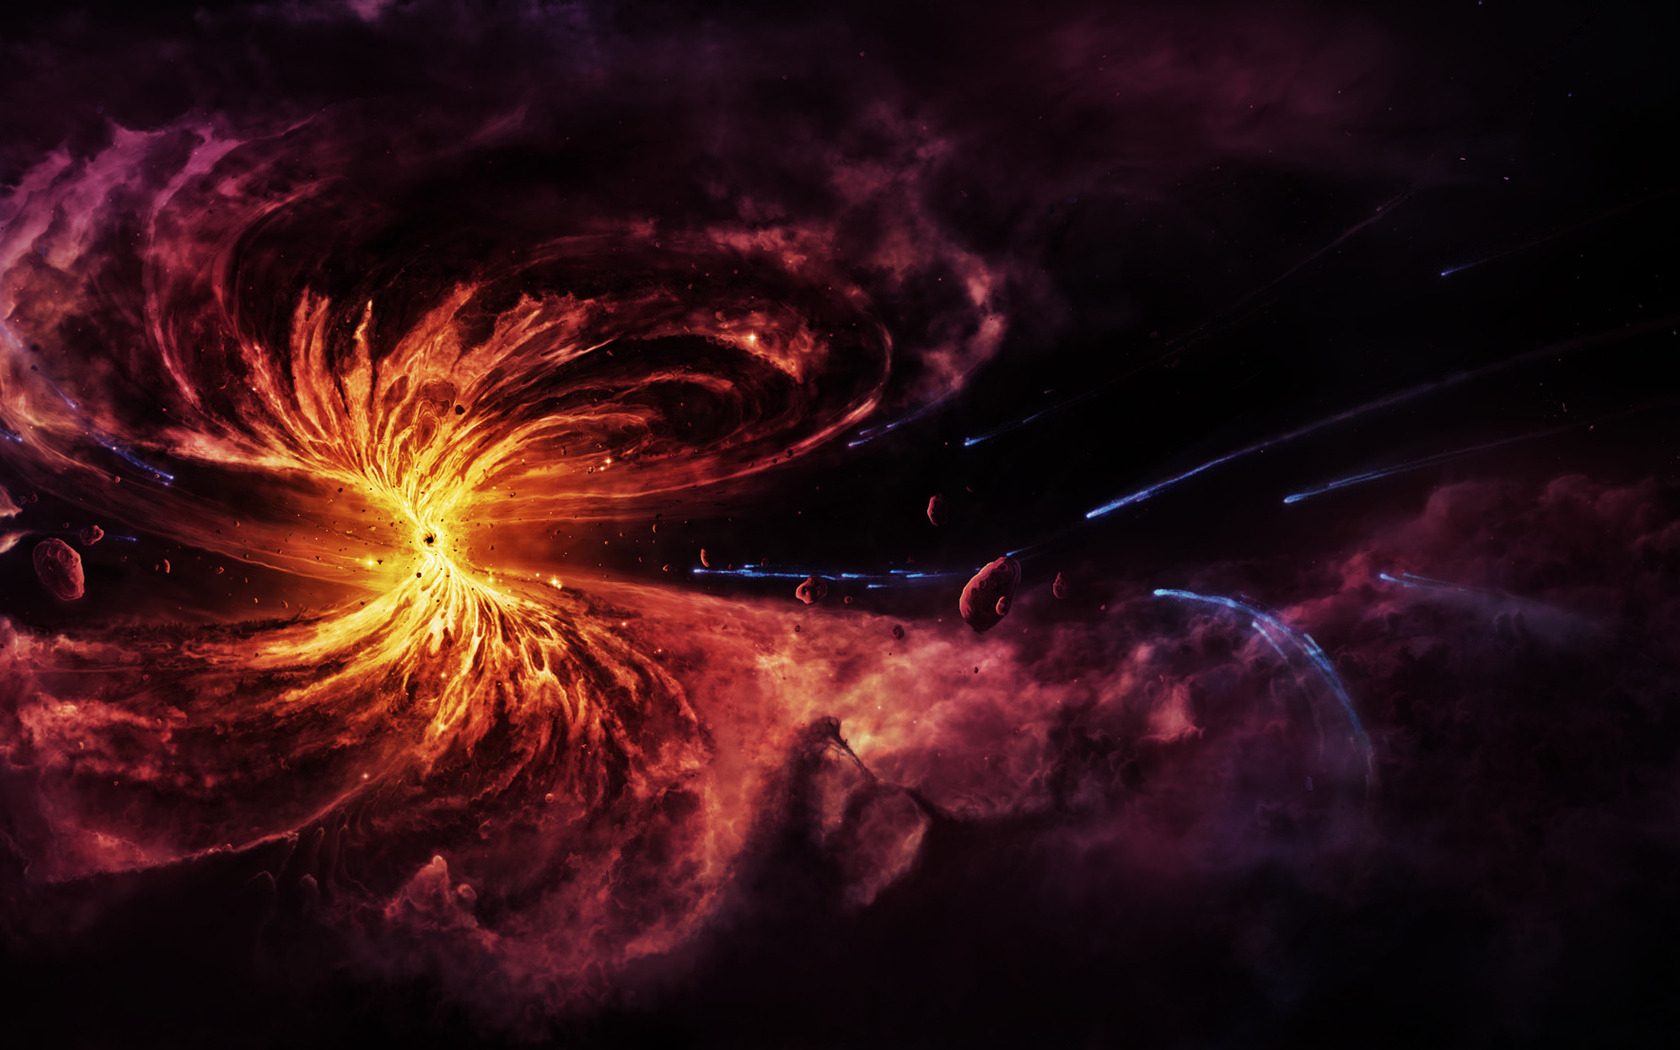 Black hole wallpapers and images - wallpapers, pictures, photos